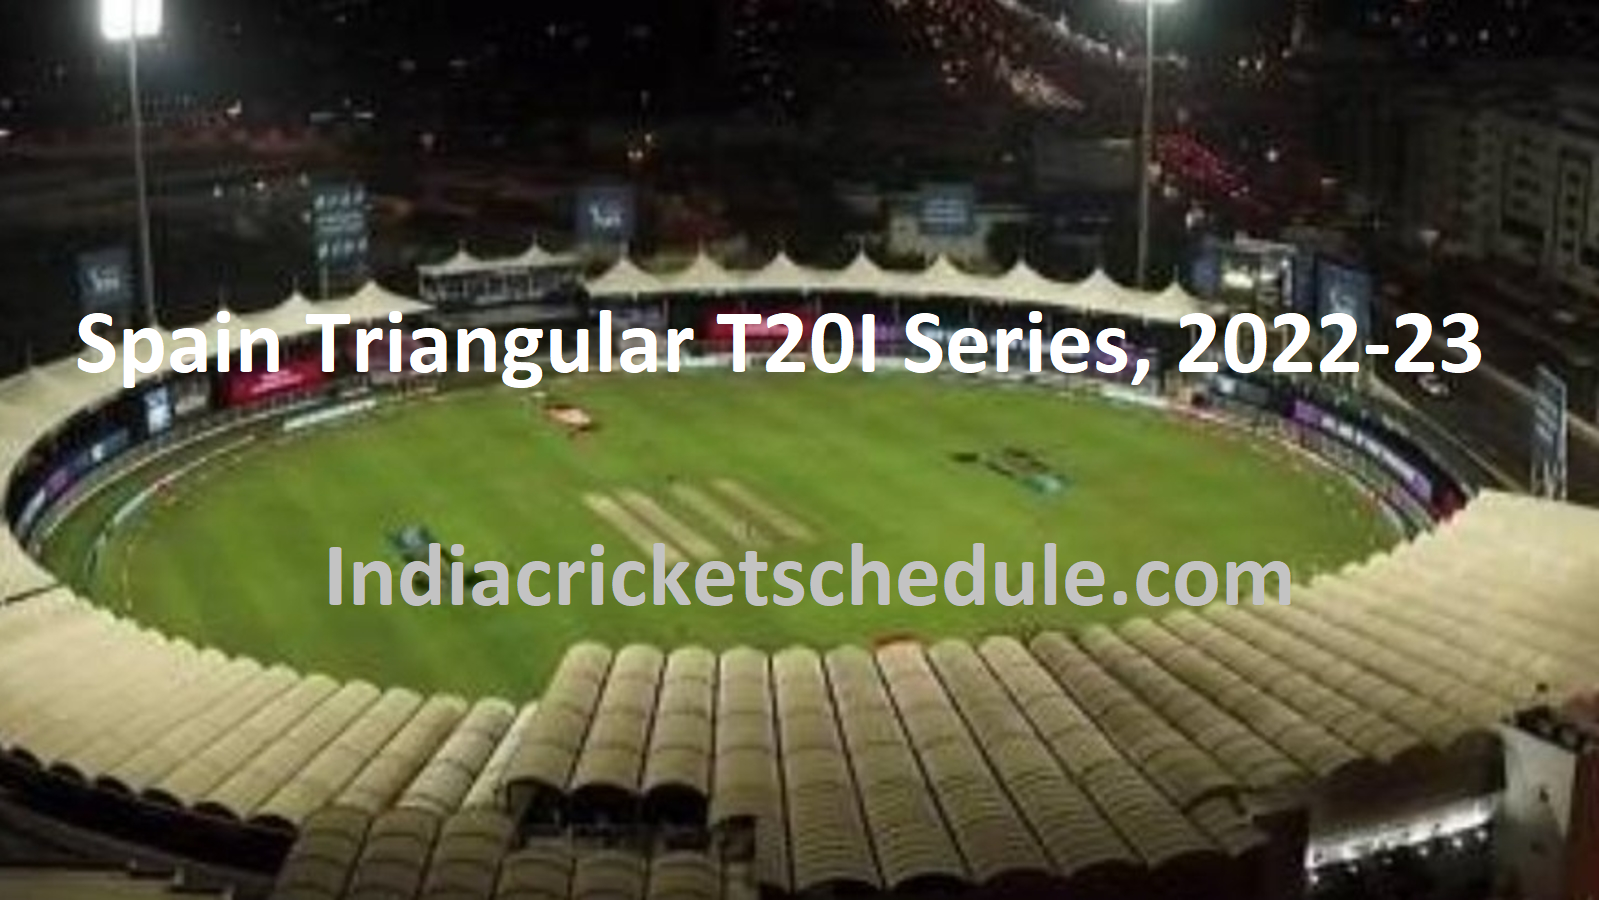 Spain Triangular T20I Series 2022-23 Schedule and fixtures, Squads. Italy vs Germany vs Spain 2022/22 Team Match Time Table, Captain and Players list, live score, ESPNcricinfo, Cricbuzz, Wikipedia, International Cricket Tour 2022.